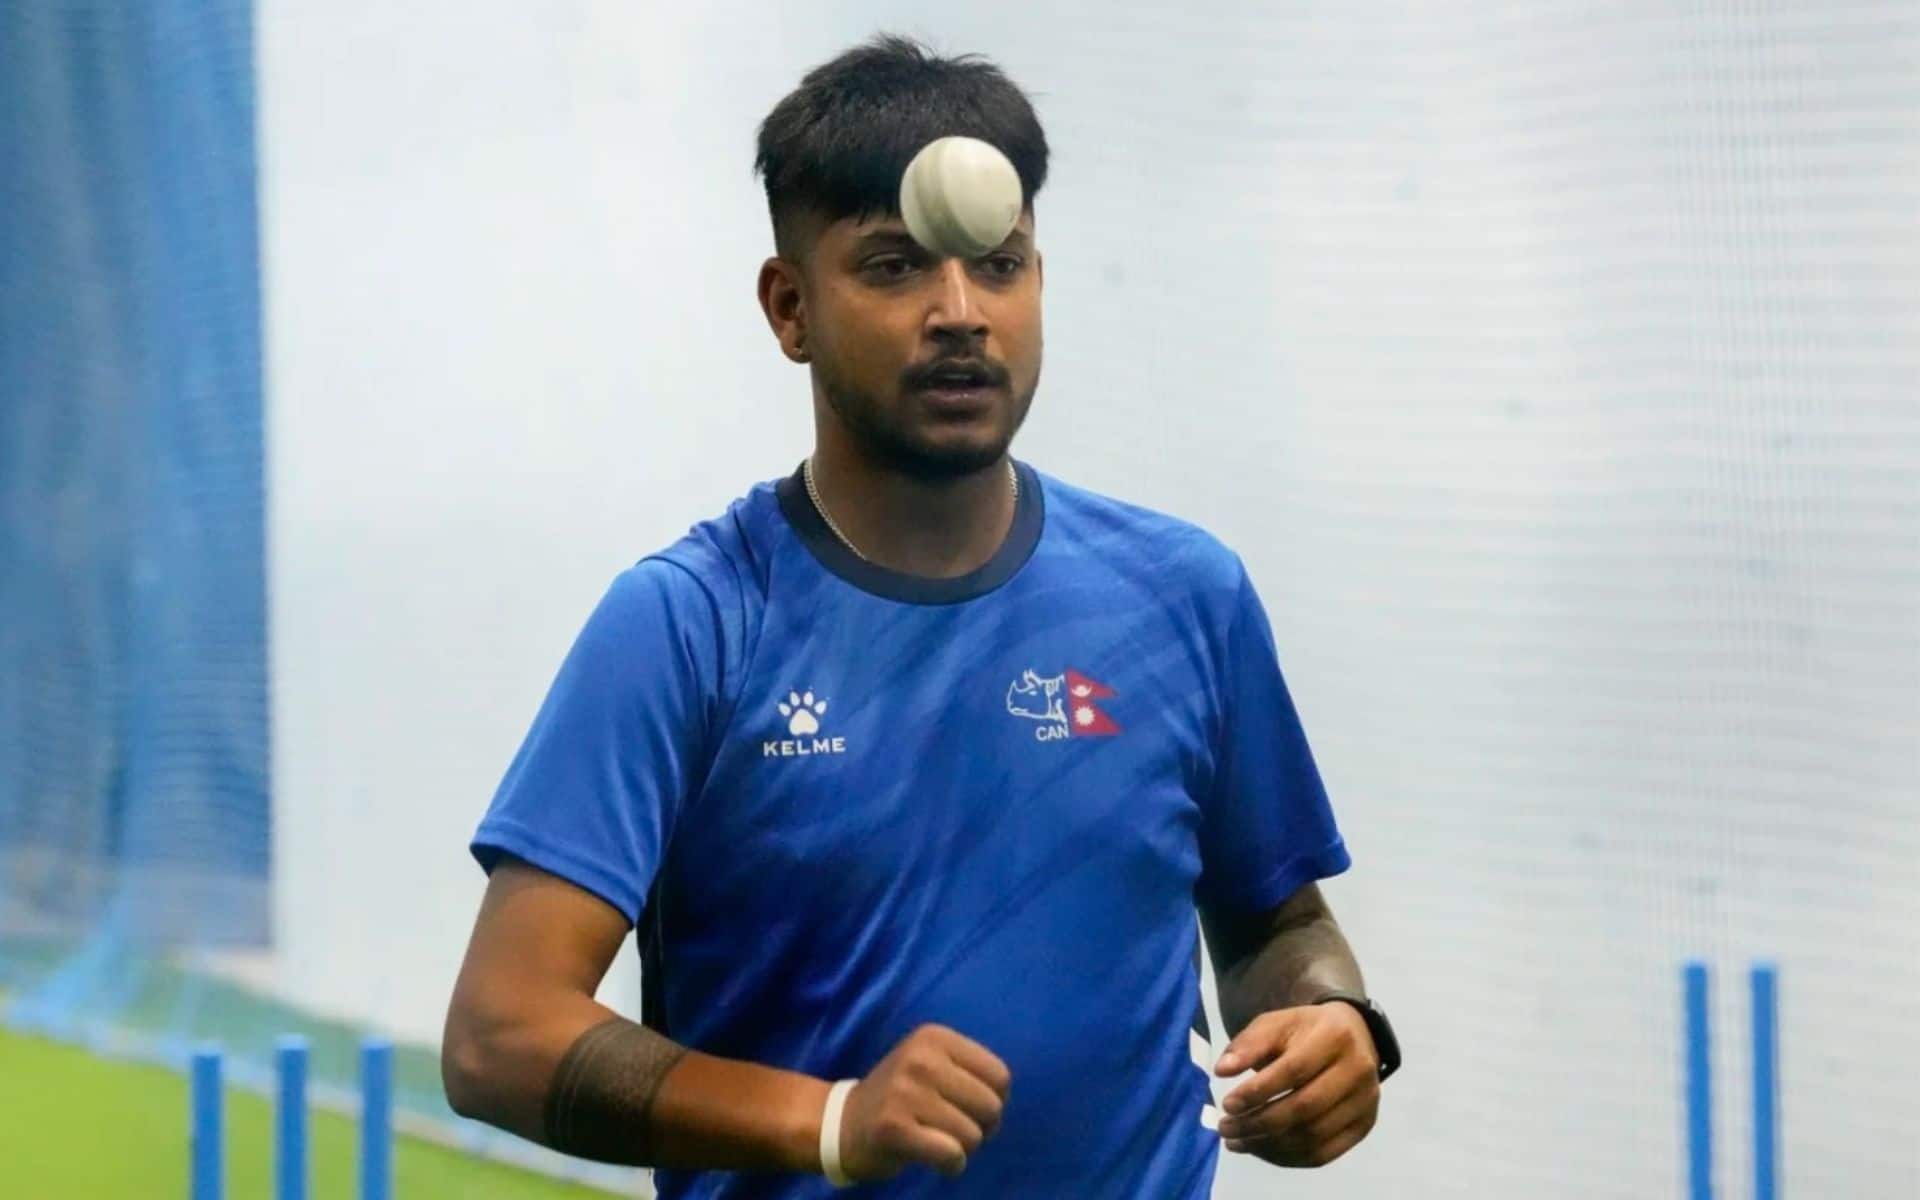 Lamichhane is been included in NEP's squad for WI leg (x.com)